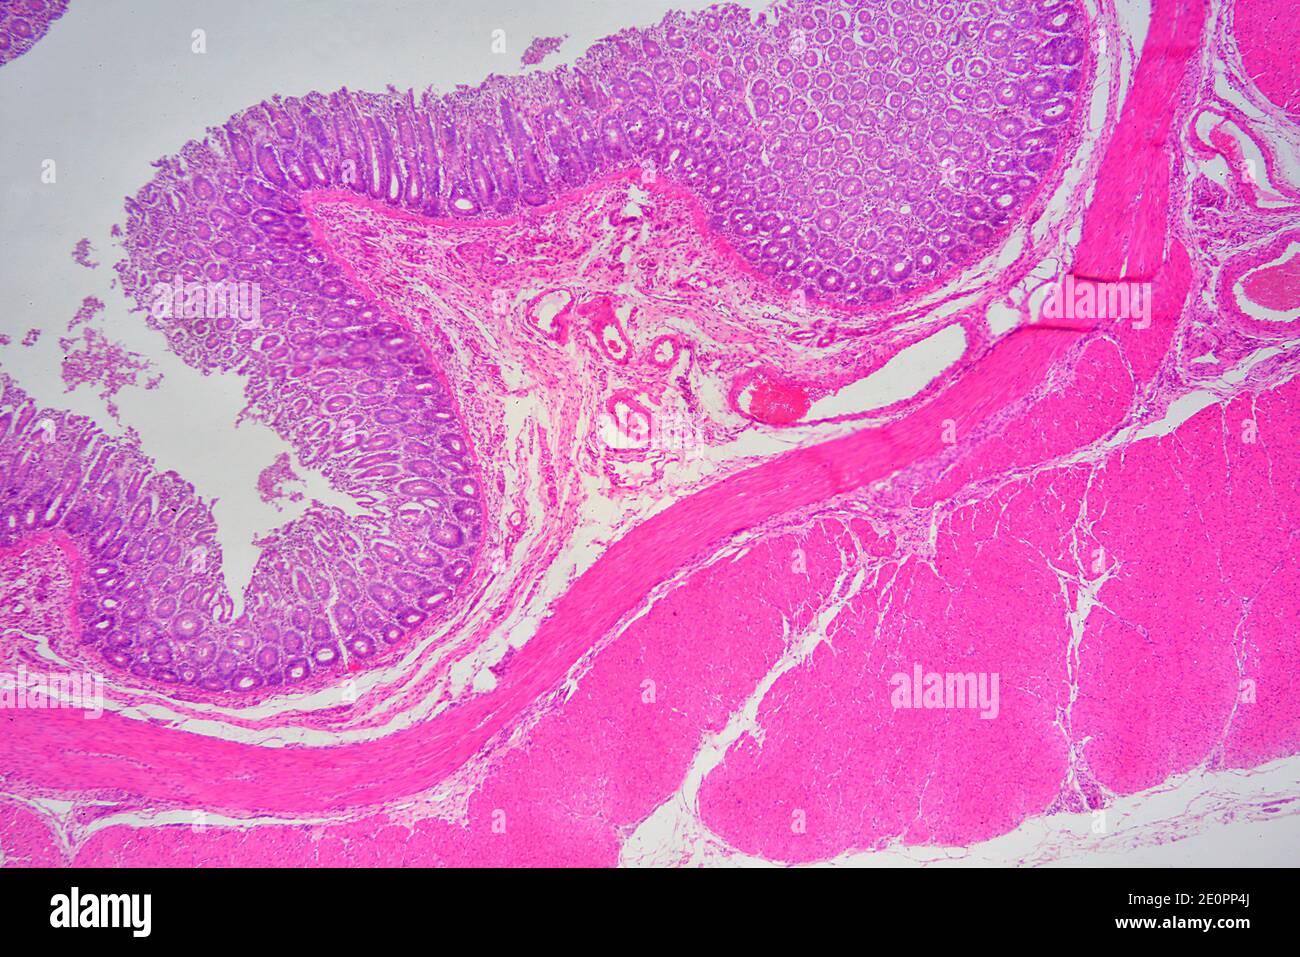 Human rectum with mucosa, intestinal glands, blood vessels and muscular layers. X25 at 10 cm wide. Stock Photo